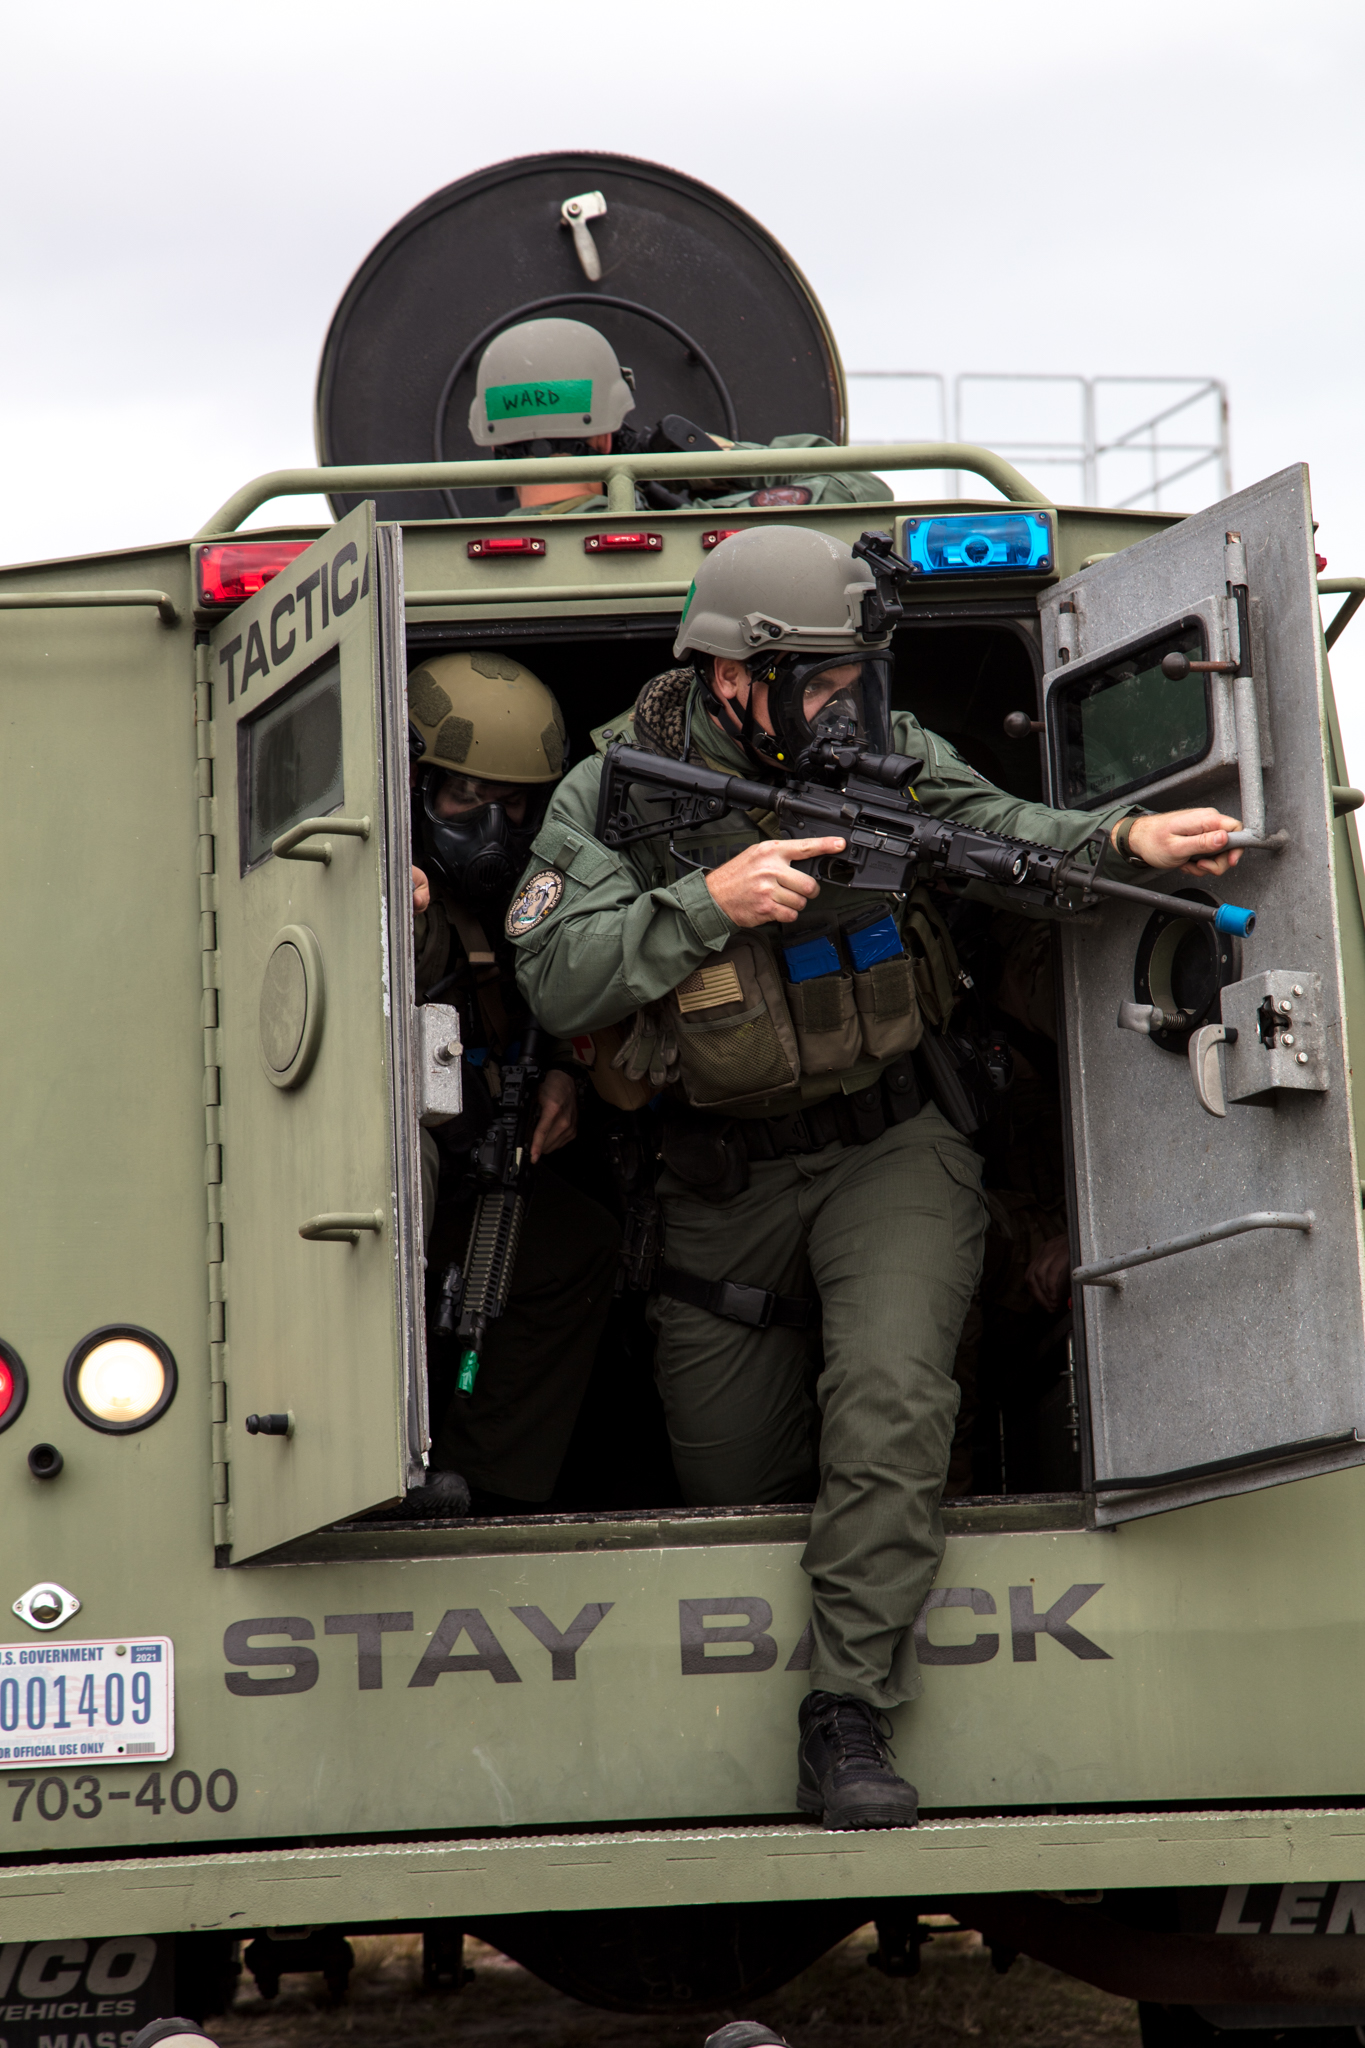 Emergency Response Team members exit a vehicle during a training exercise.